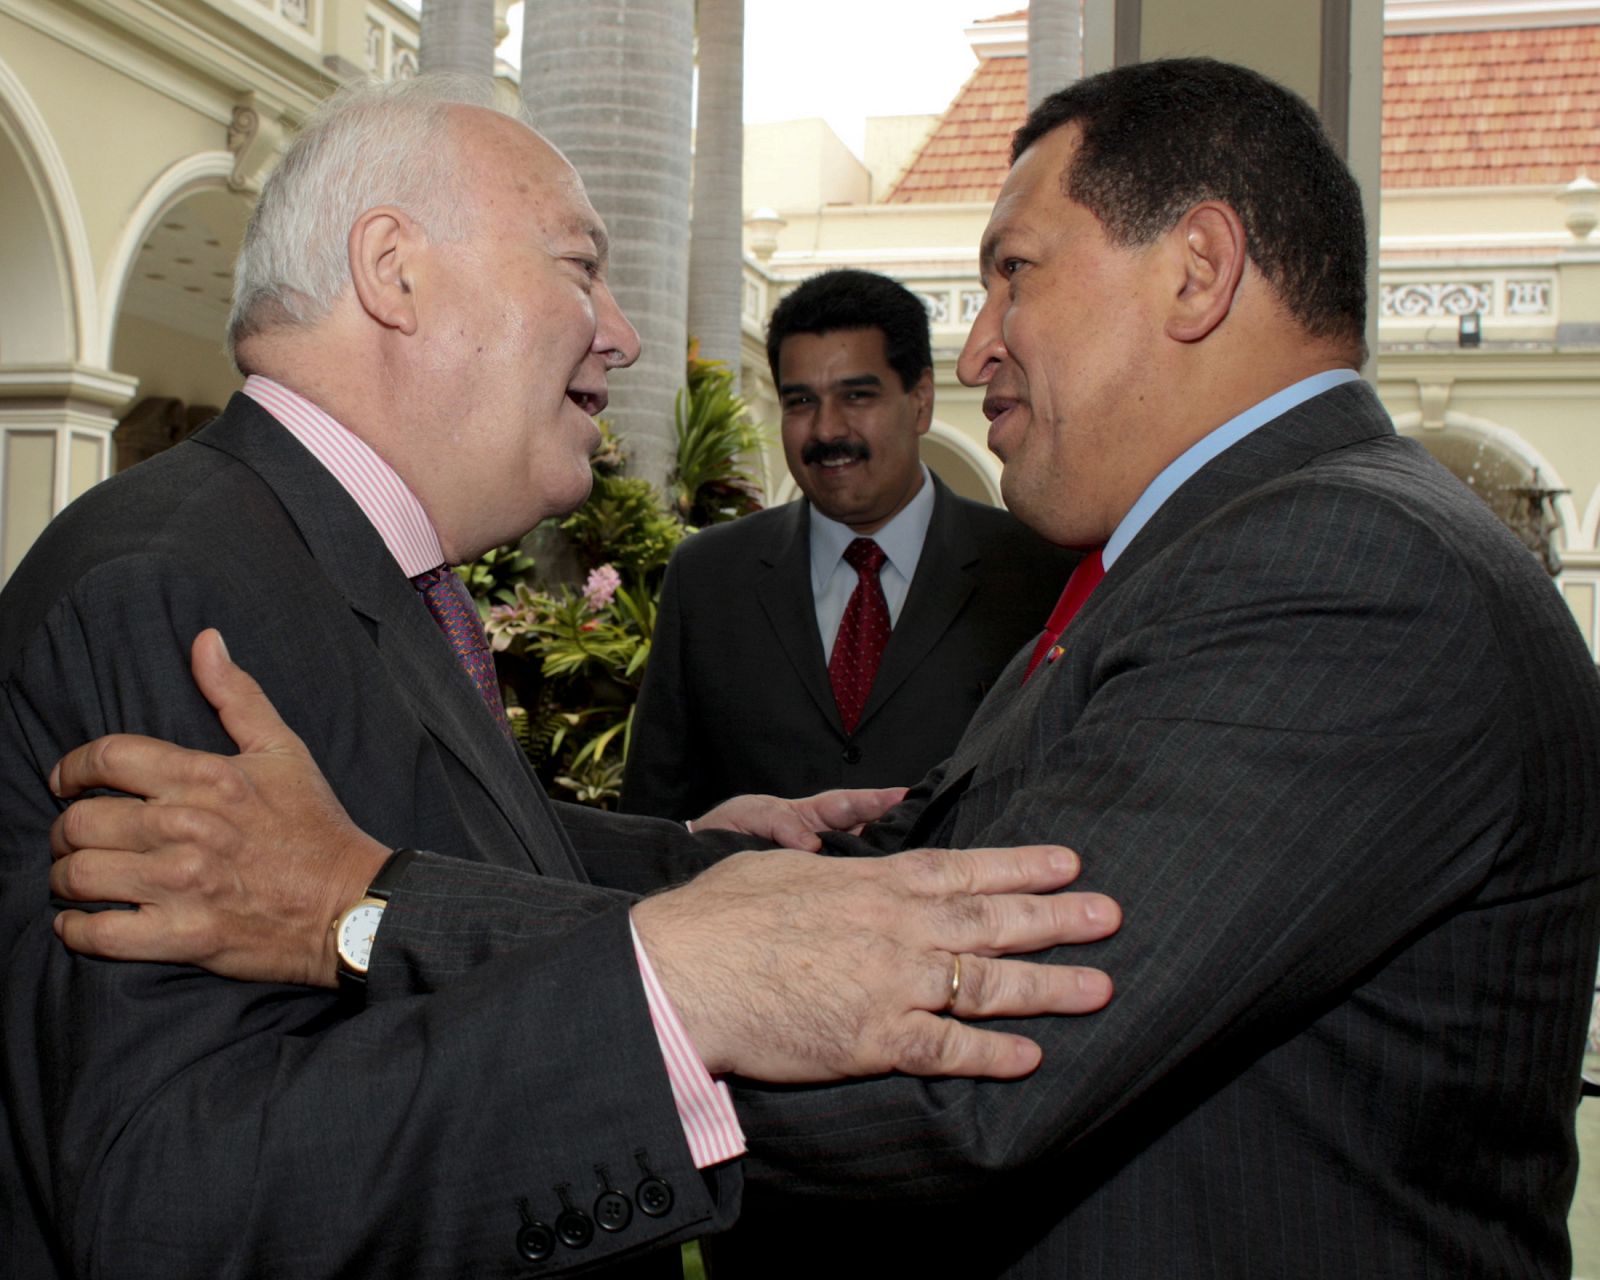 Venezuelan President Hugo Chavez (R) greets Spain's Foreign Minister Miguel Angel Moratinos (L) at the Miraflores Palace in Caracas